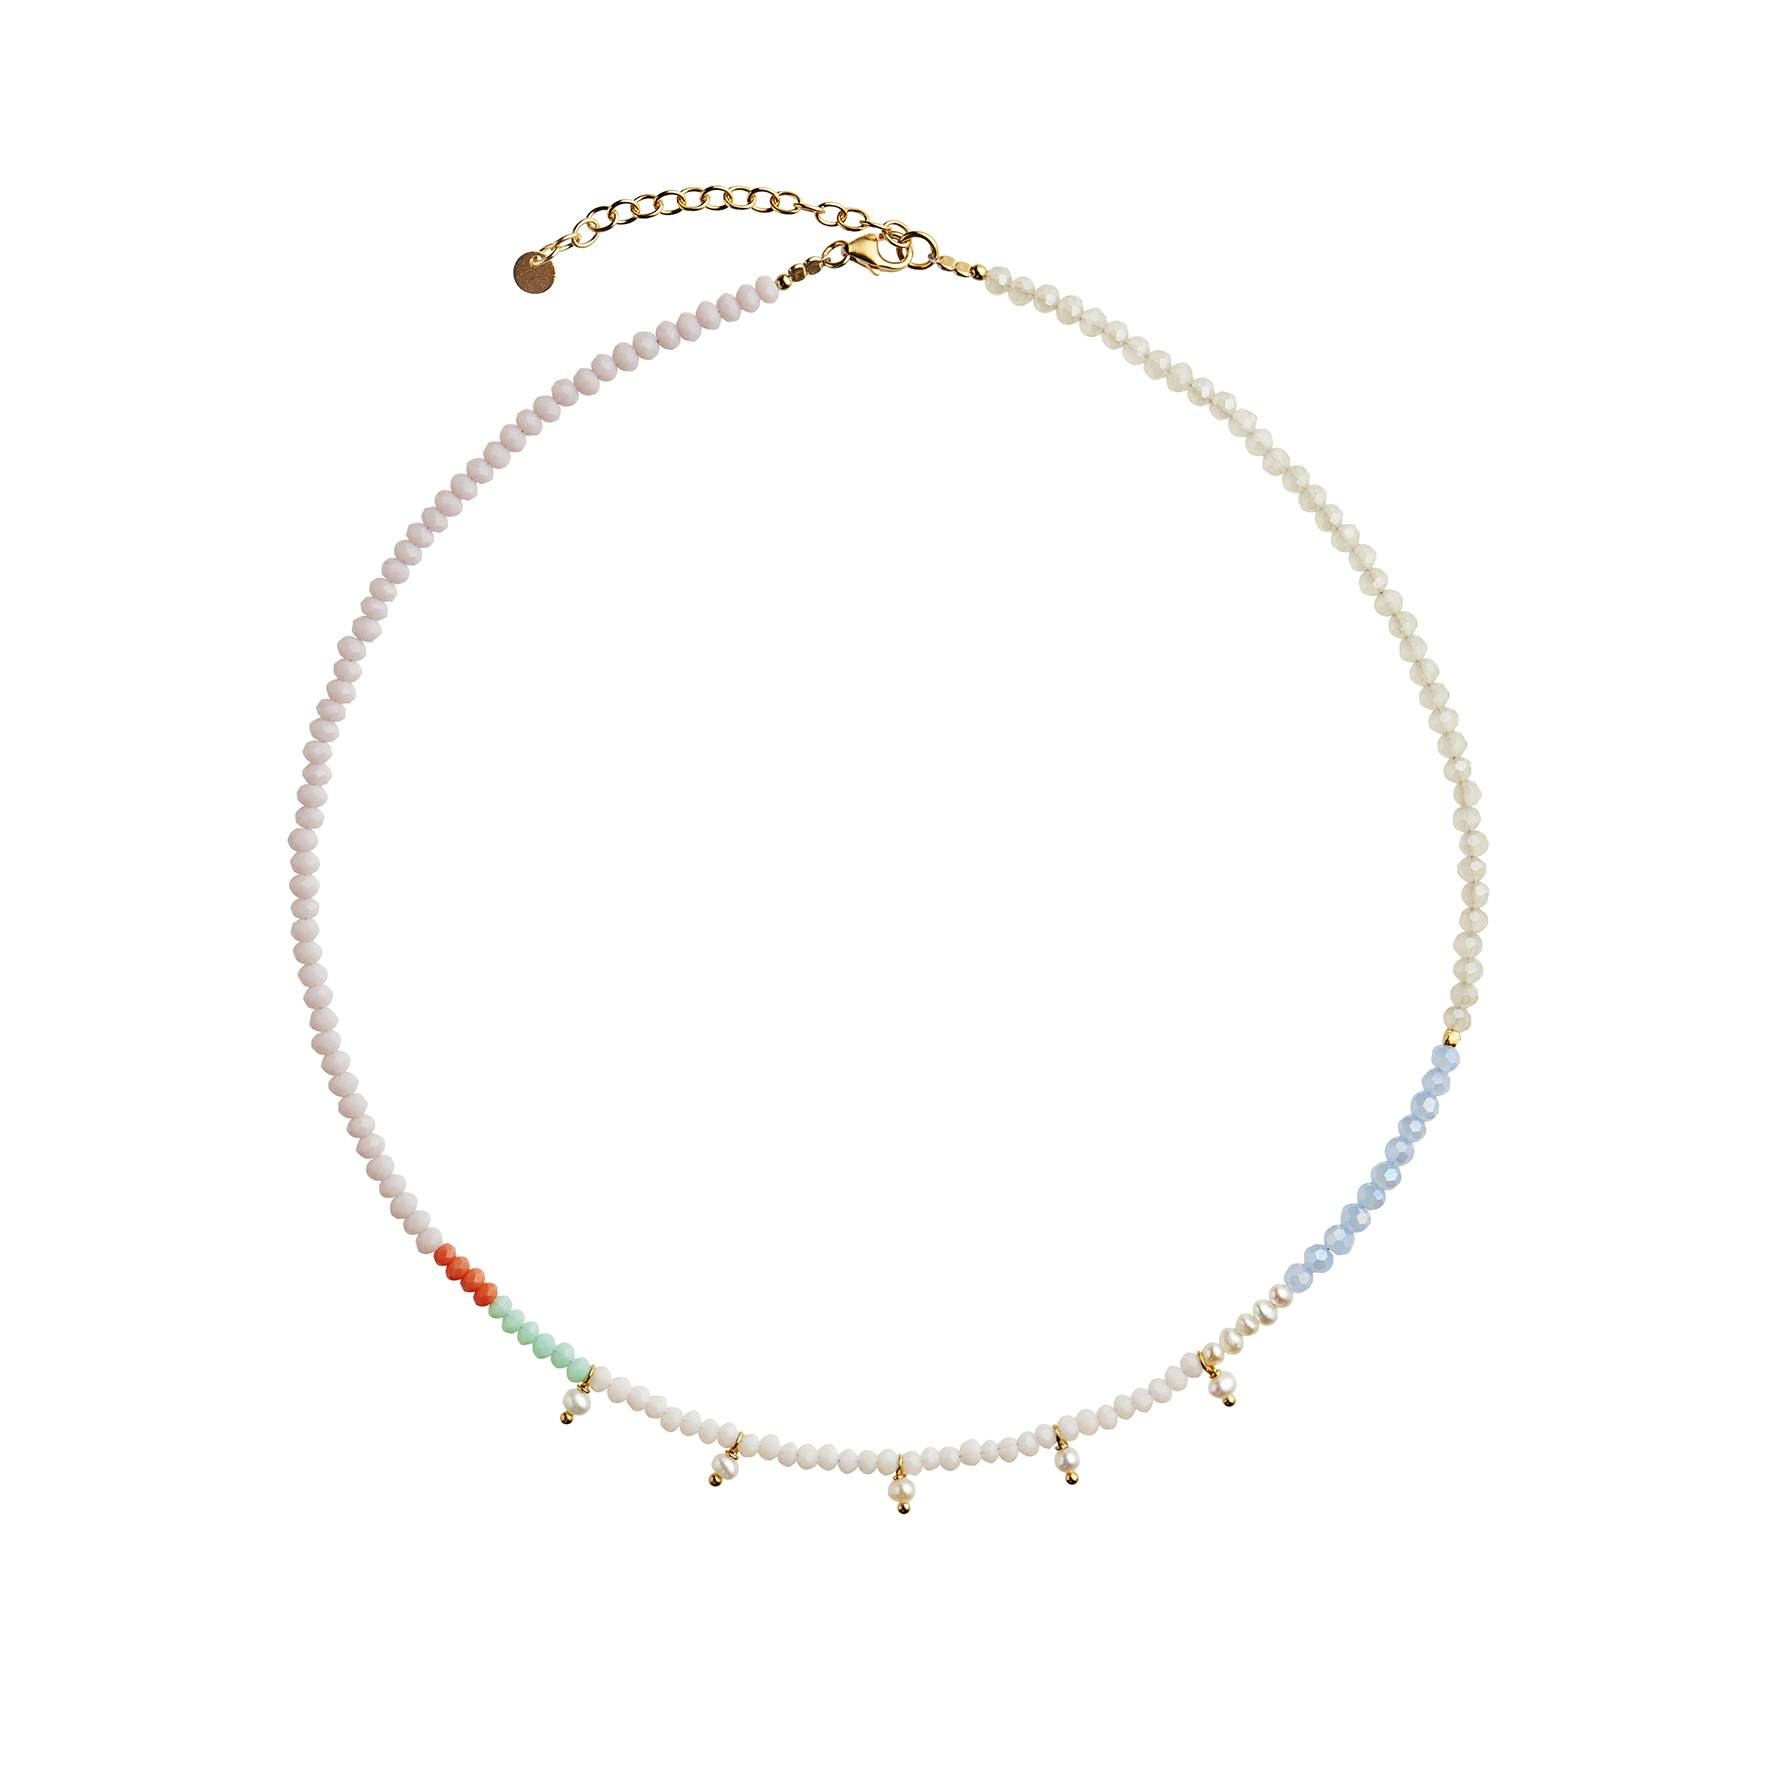 Heavenly Pearl Dream Necklace With Five Pendants Coral & Cool Mint from STINE A Jewelry in Goldplated-Silver Sterling 925